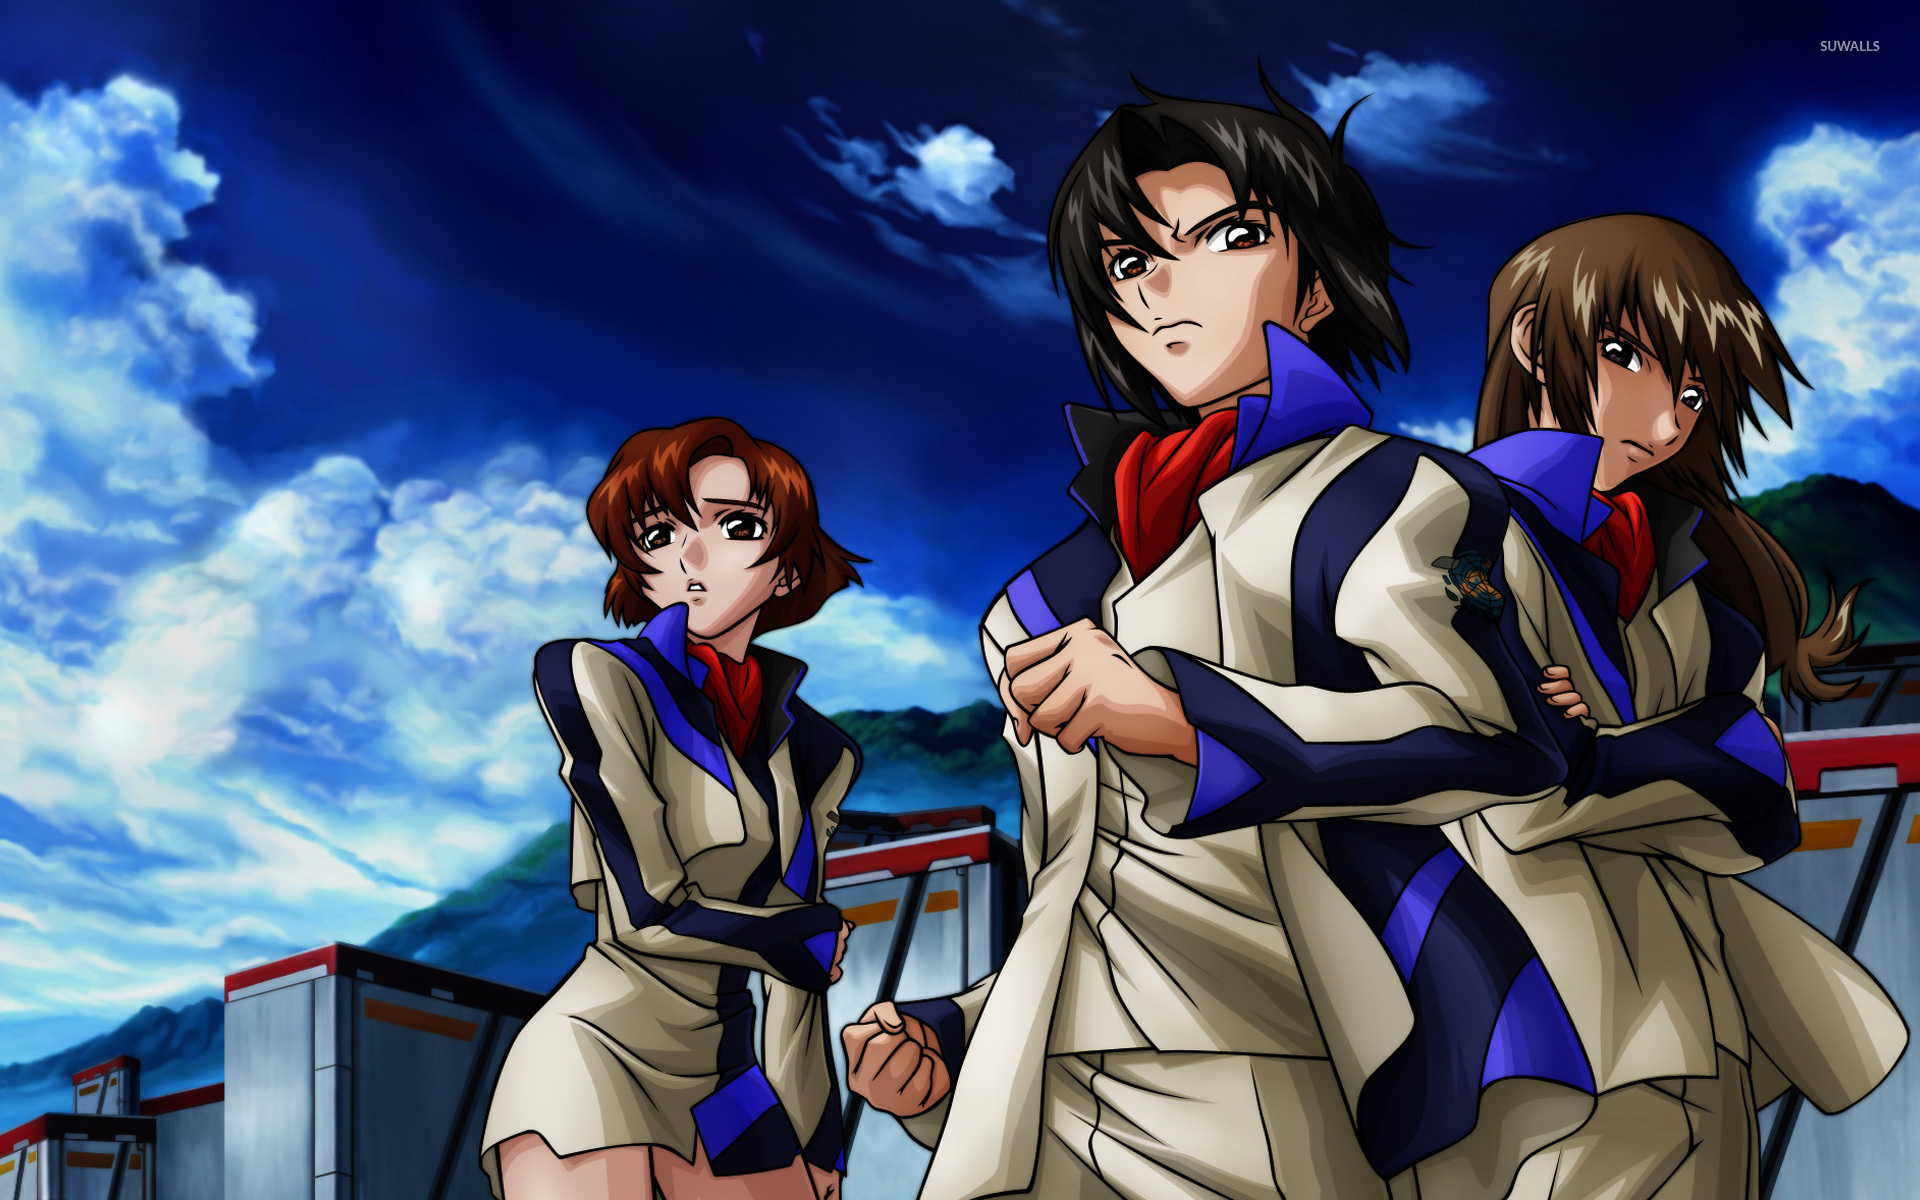 Mobile Suit Gundam Seed Wallpaper Anime Wallpapers 6279 Images, Photos, Reviews